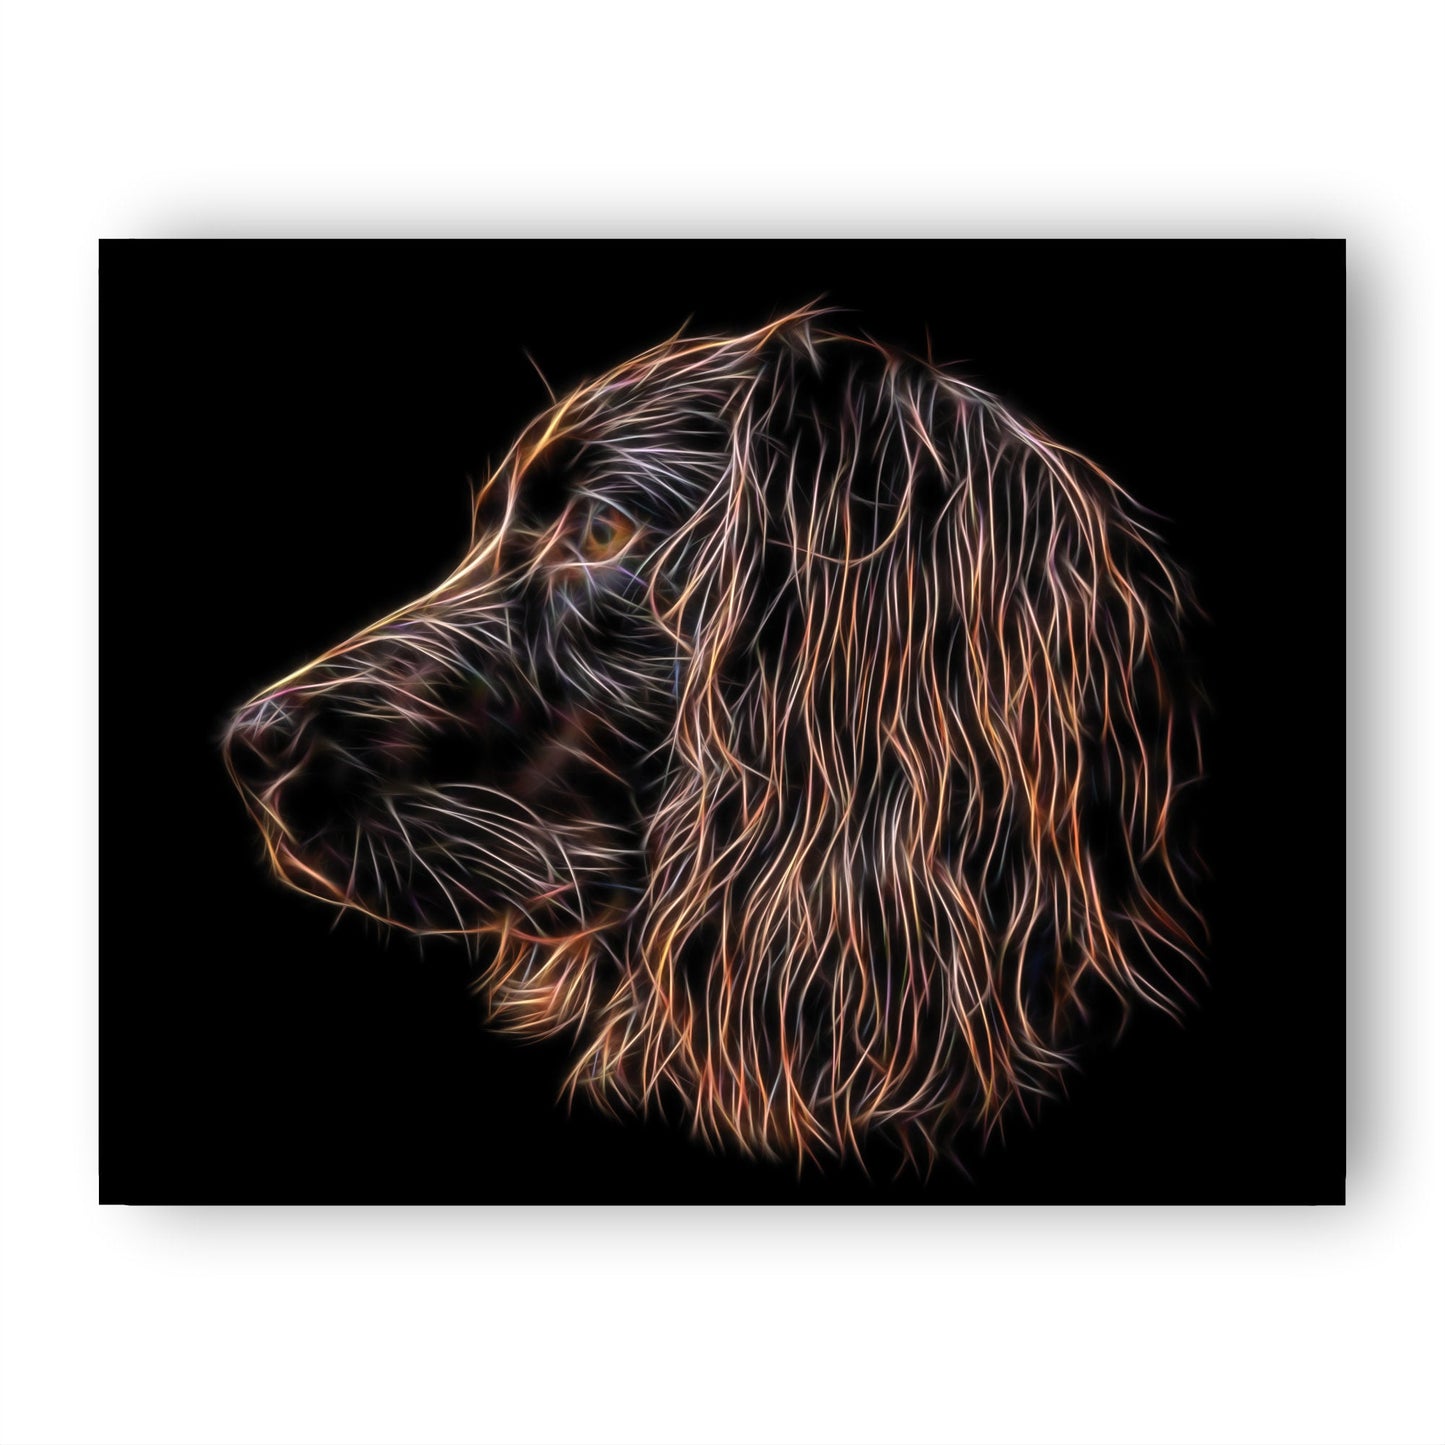 Chocolate Working Cocker Spaniel Print with Stunning Fractal Art Design. Various Sizes Available